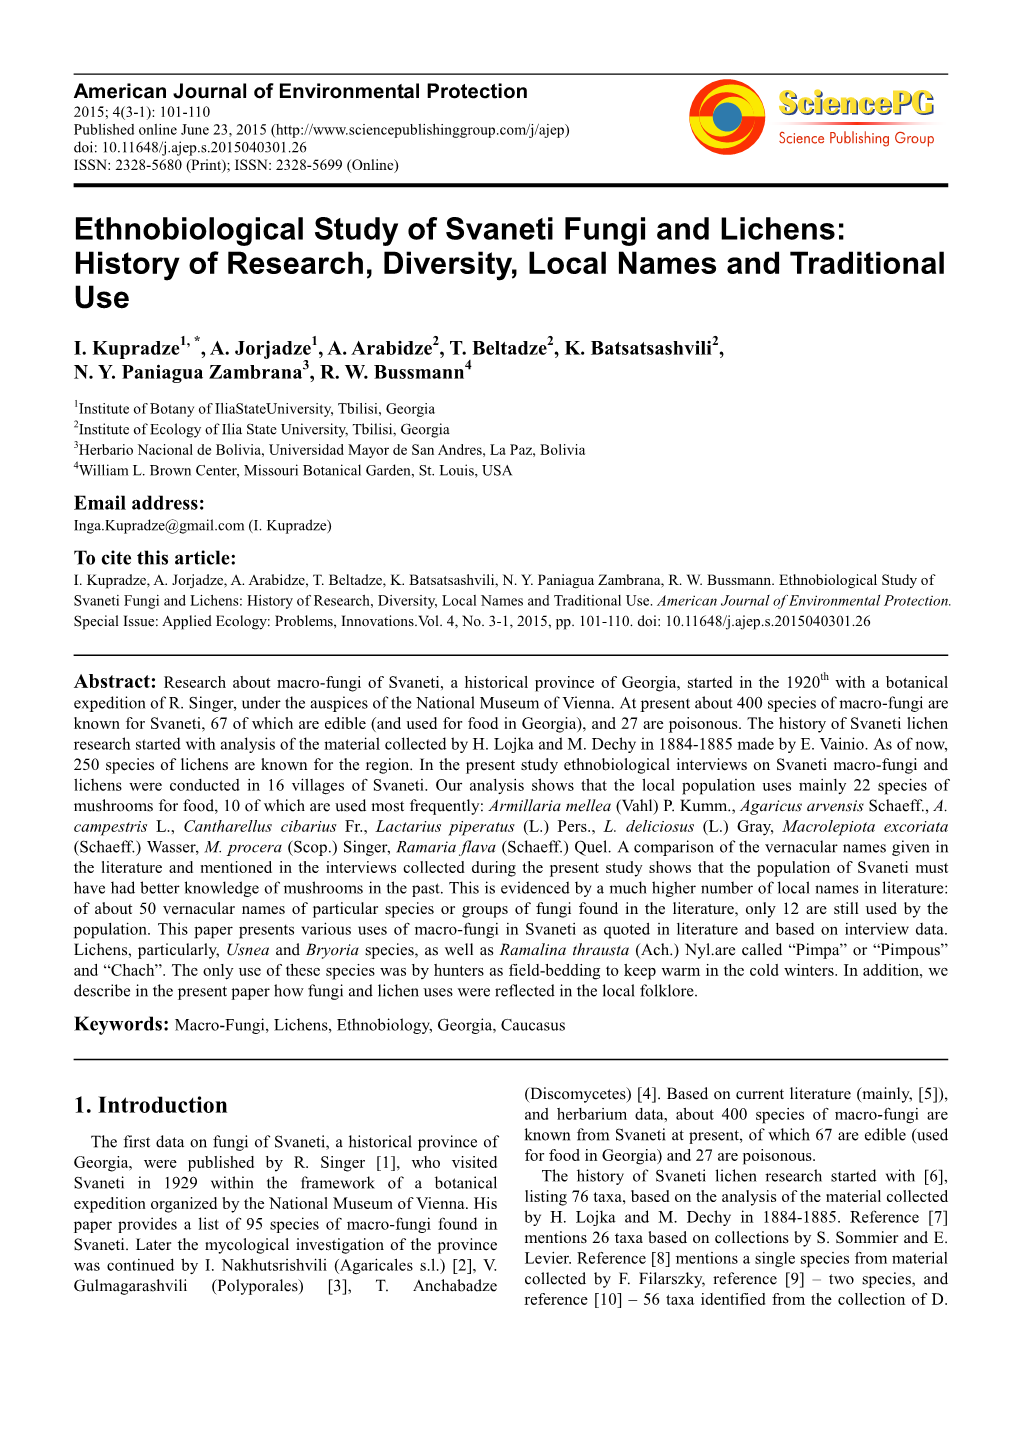 Ethnobiological Study of Svaneti Fungi and Lichens: History of Research, Diversity, Local Names and Traditional Use